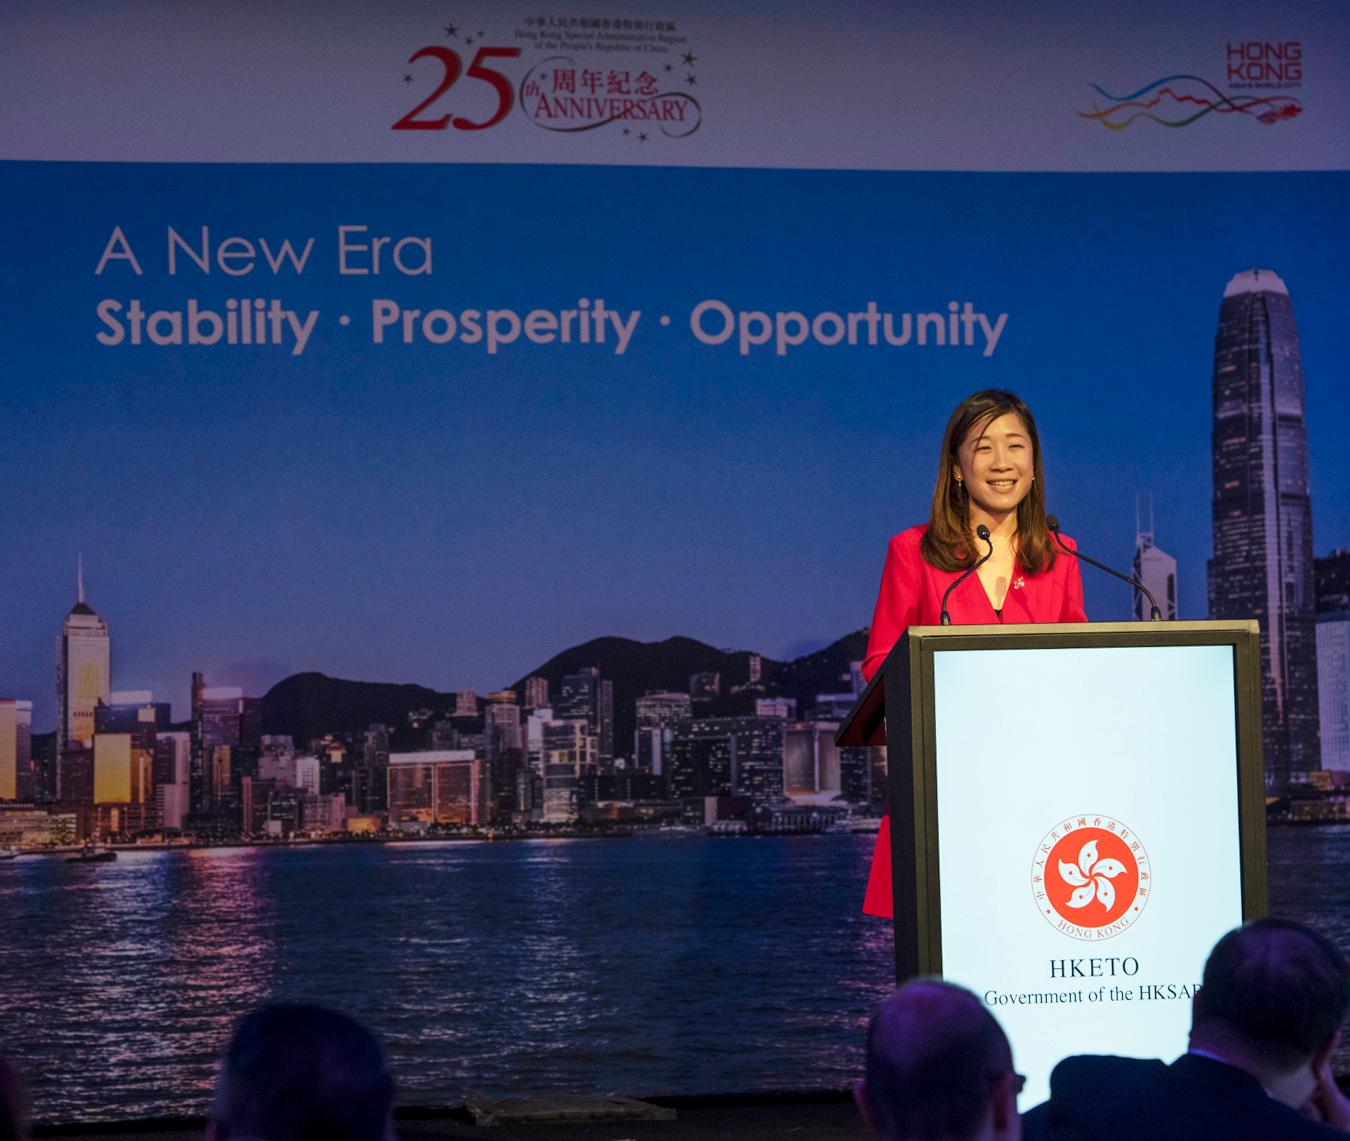 The Director of the Hong Kong Economic and Trade Office, Sydney, Miss Trista Lim, delivers a welcoming speech at the gala dinner held in Sydney, Australia, this evening (July 5) to celebrate the 25th anniversary of the establishment of the Hong Kong Special Administrative Region.